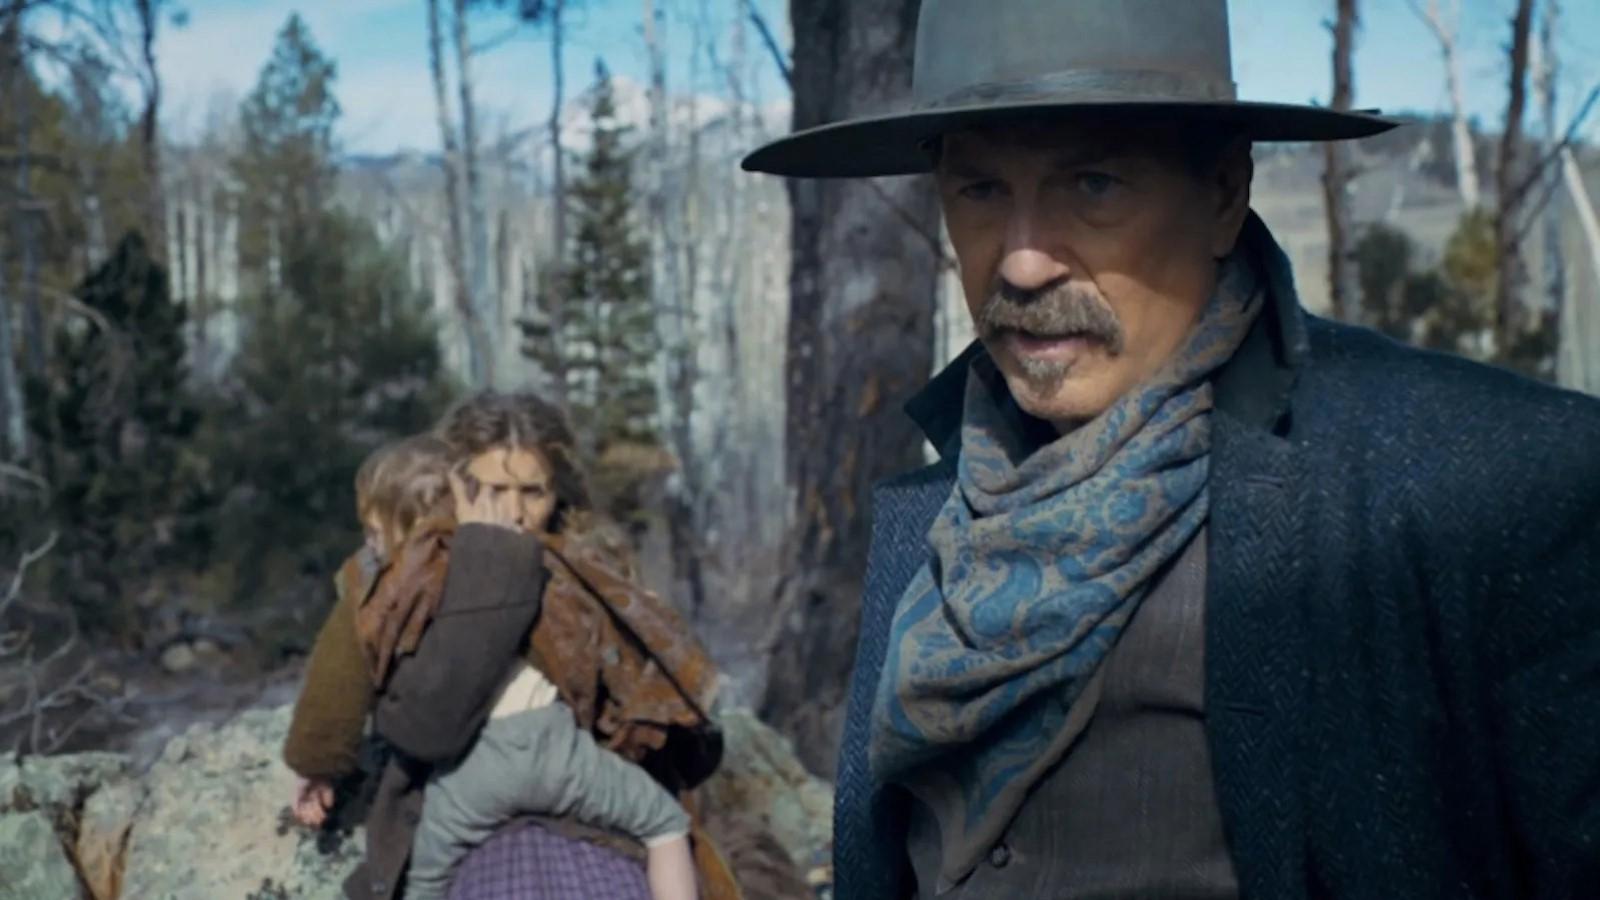 Kevin Costner in the Horizon trailer, standing in the woods with a woman and child behind him